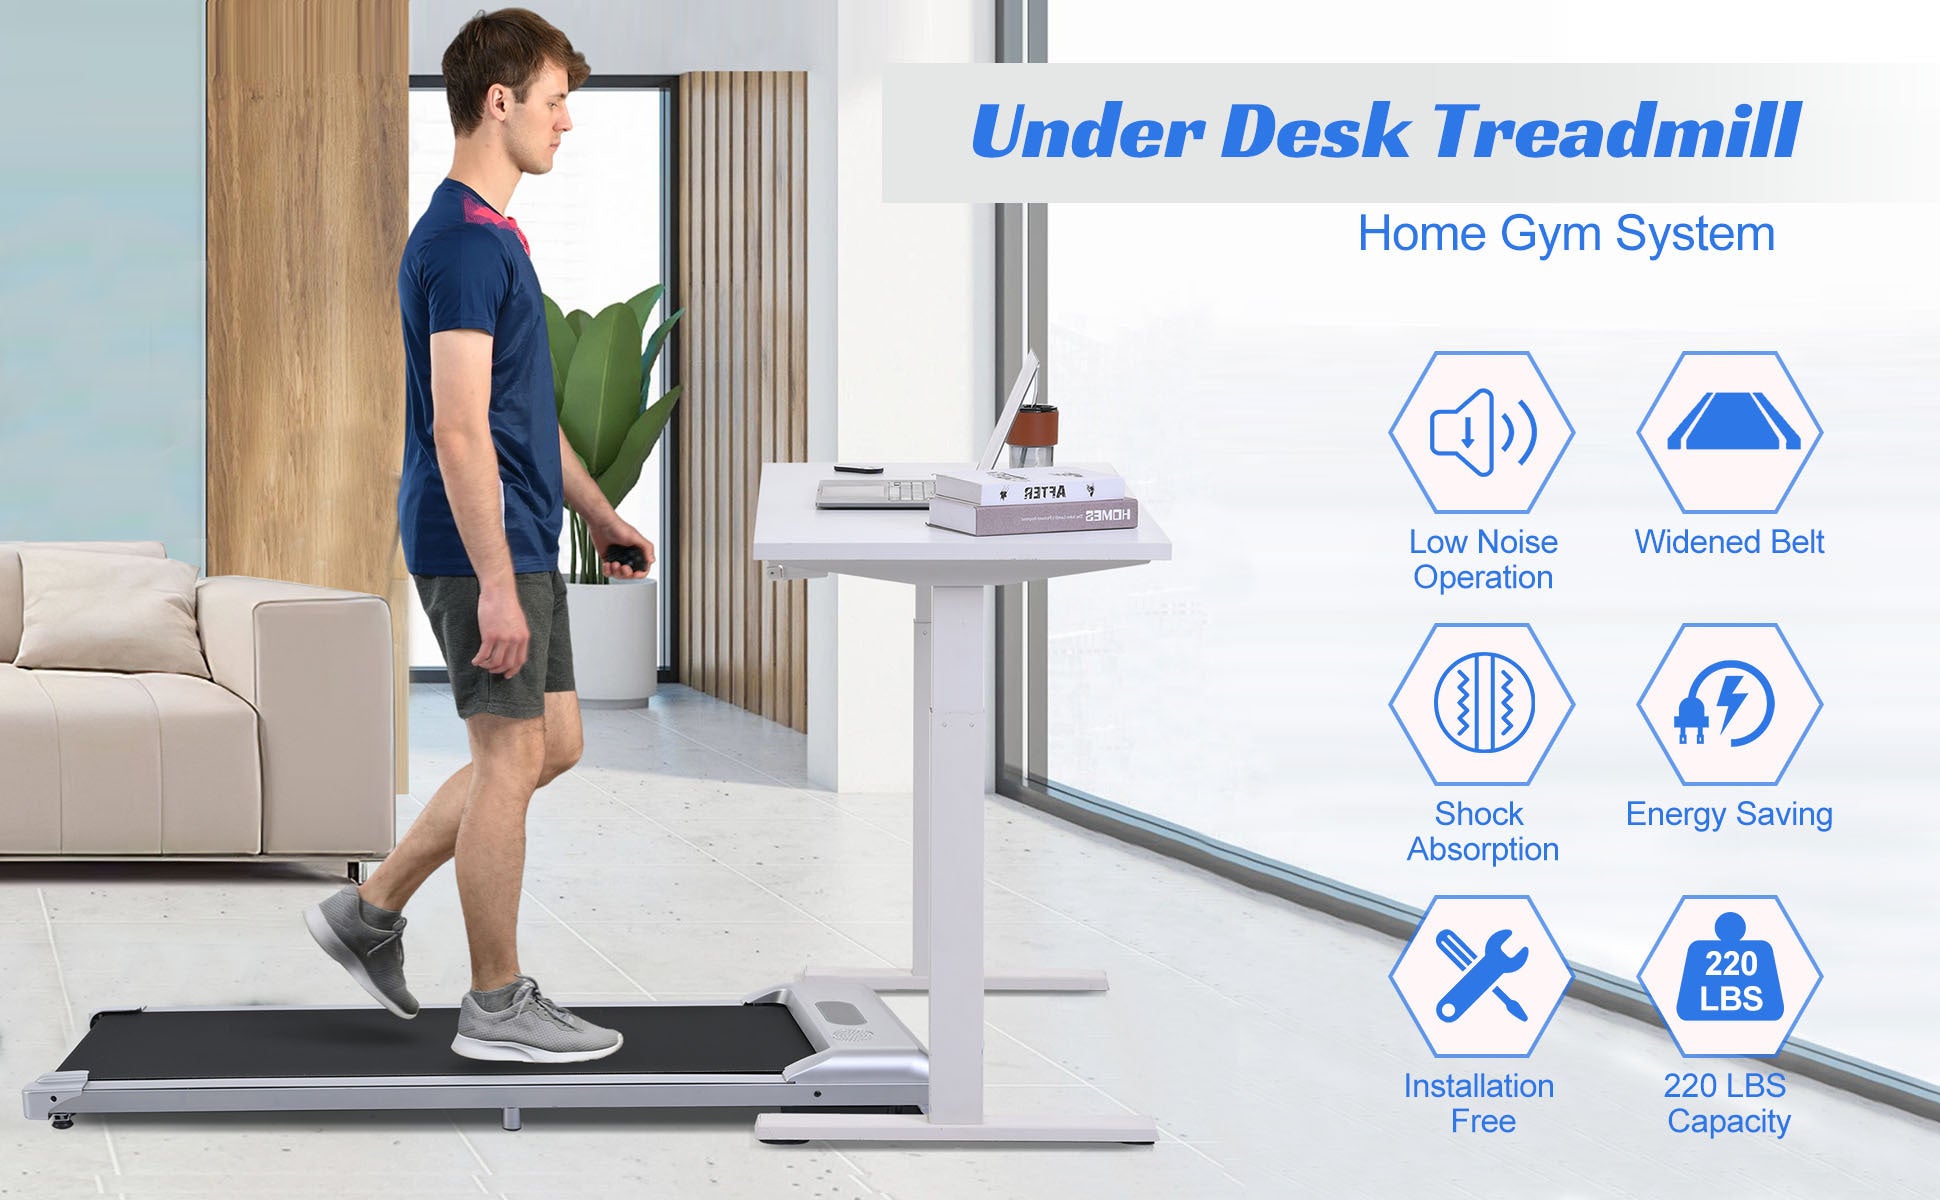 2 in 1 Under Desk Electric Treadmill 2.5HP, with silver-metal